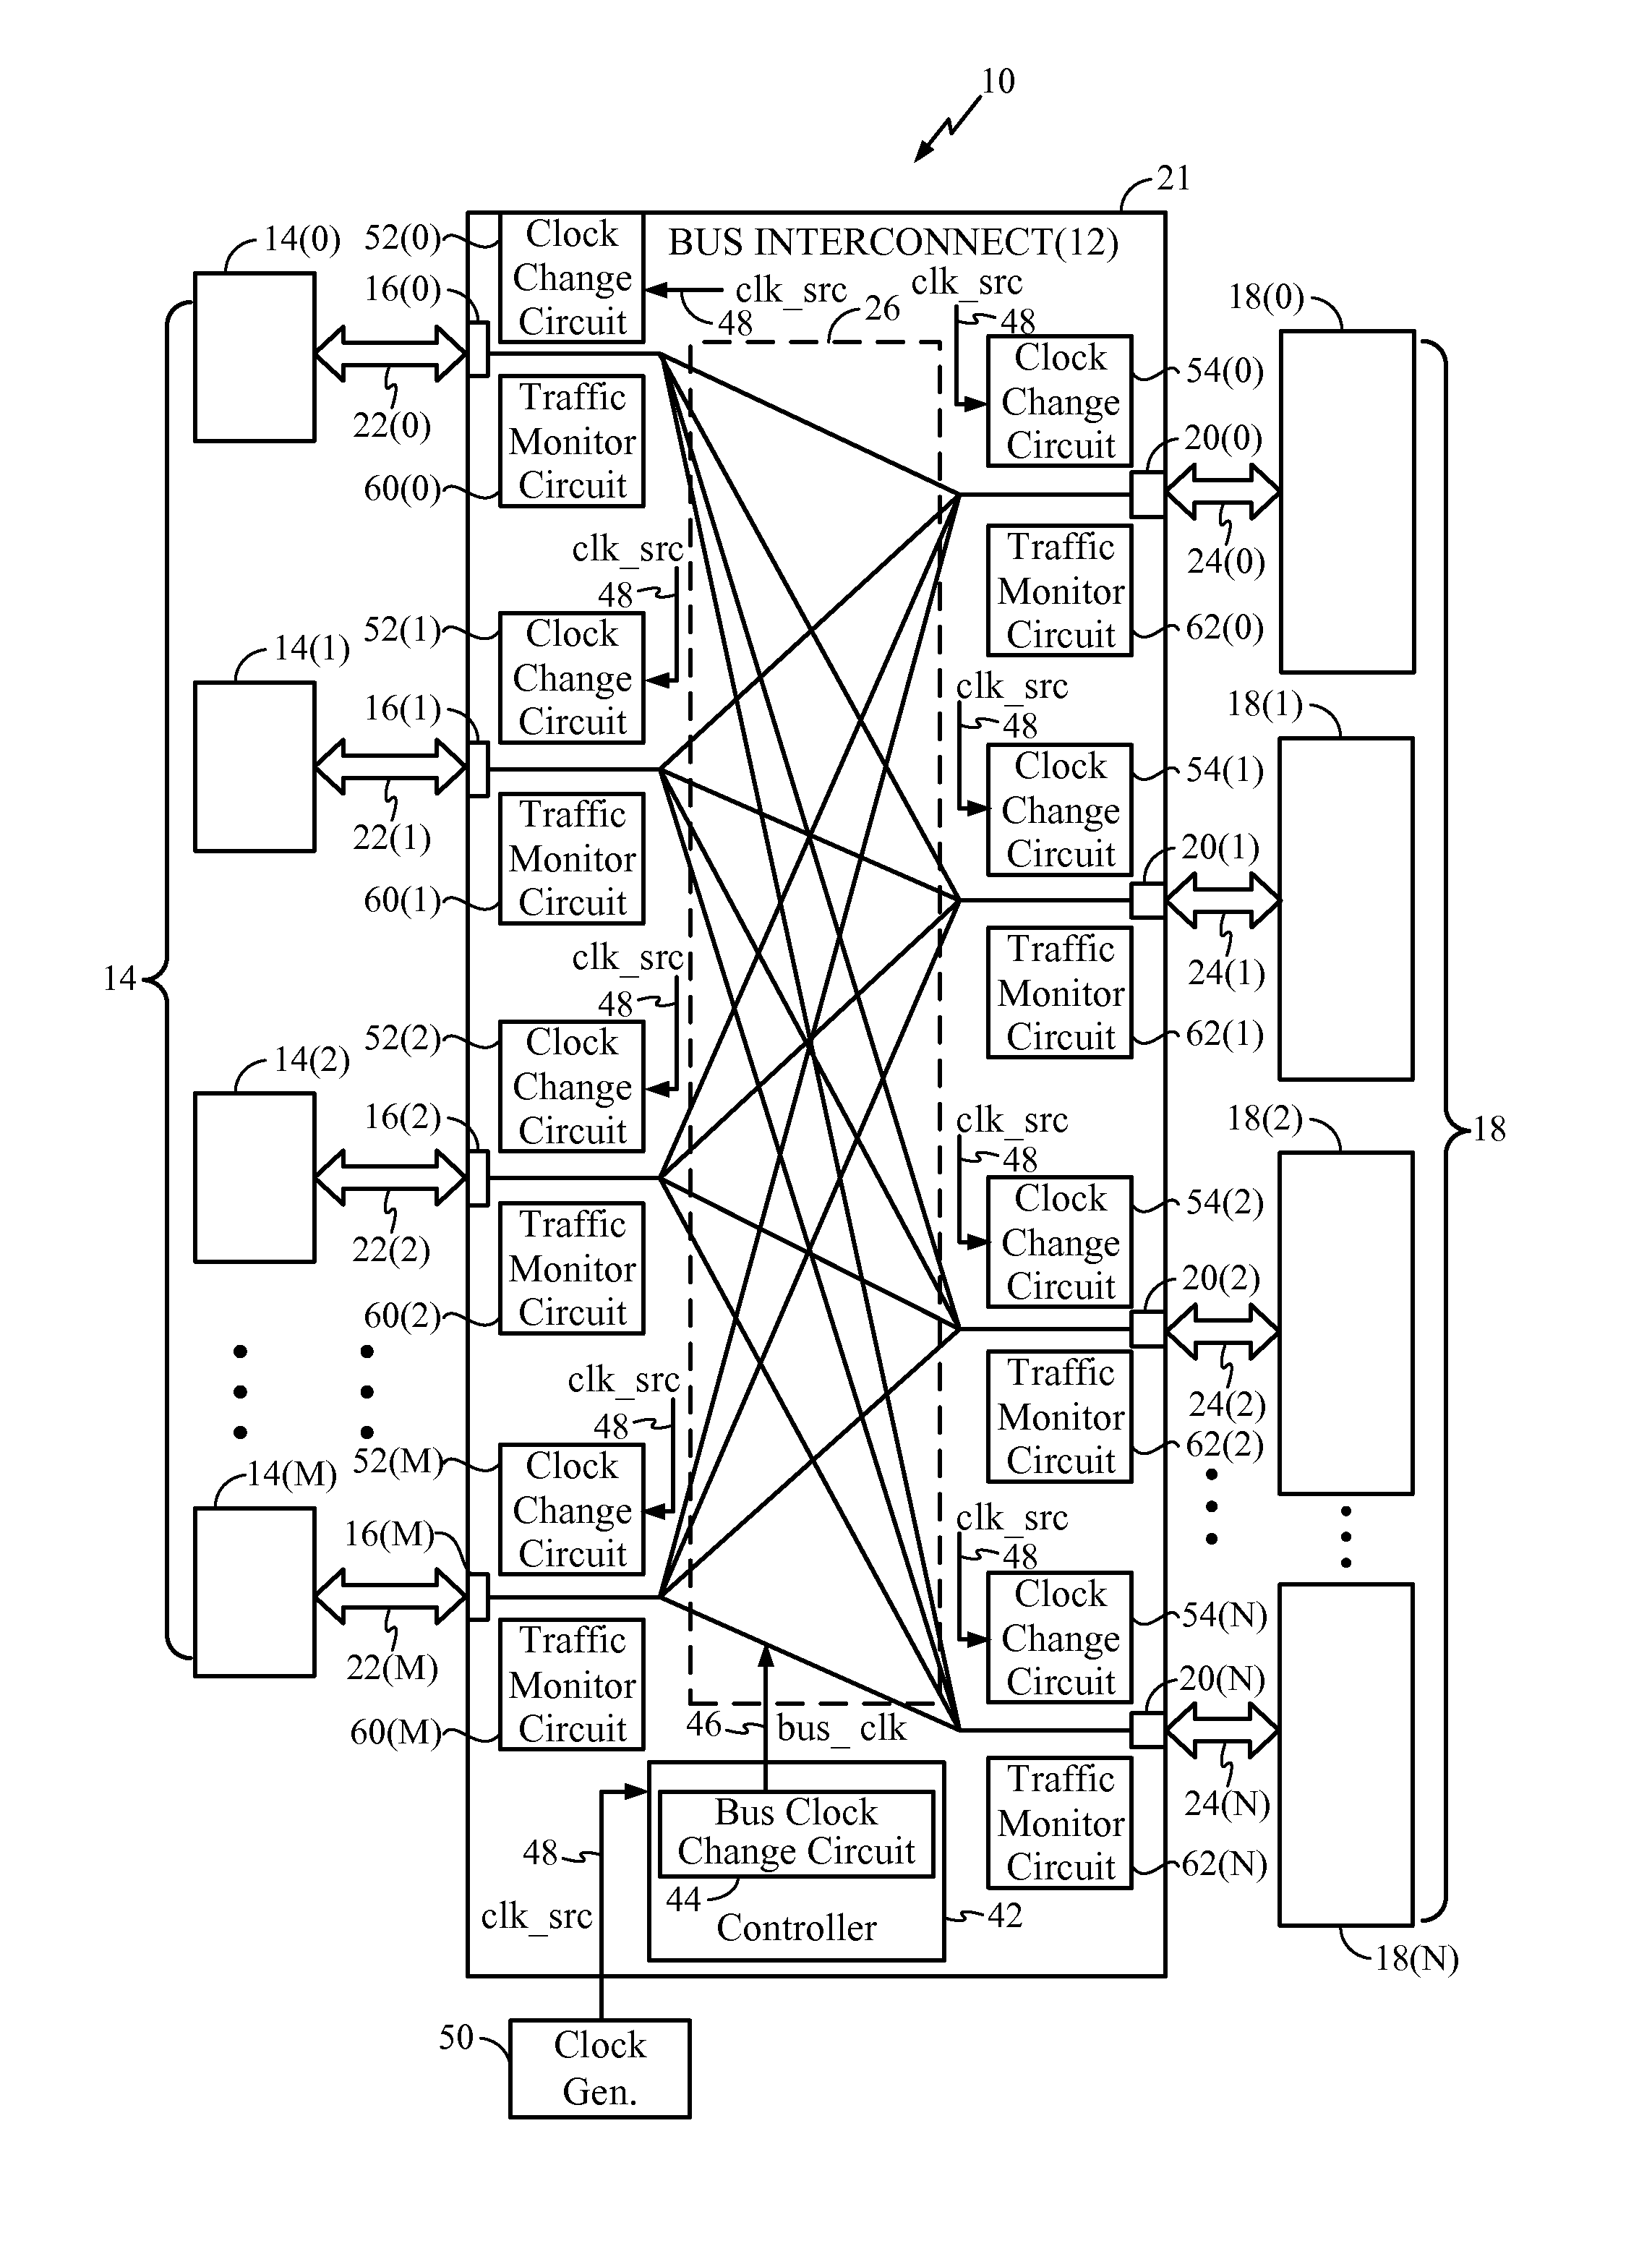 Bus Clock Frequency Scaling for a Bus Interconnect and Related Devices, Systems, and Methods